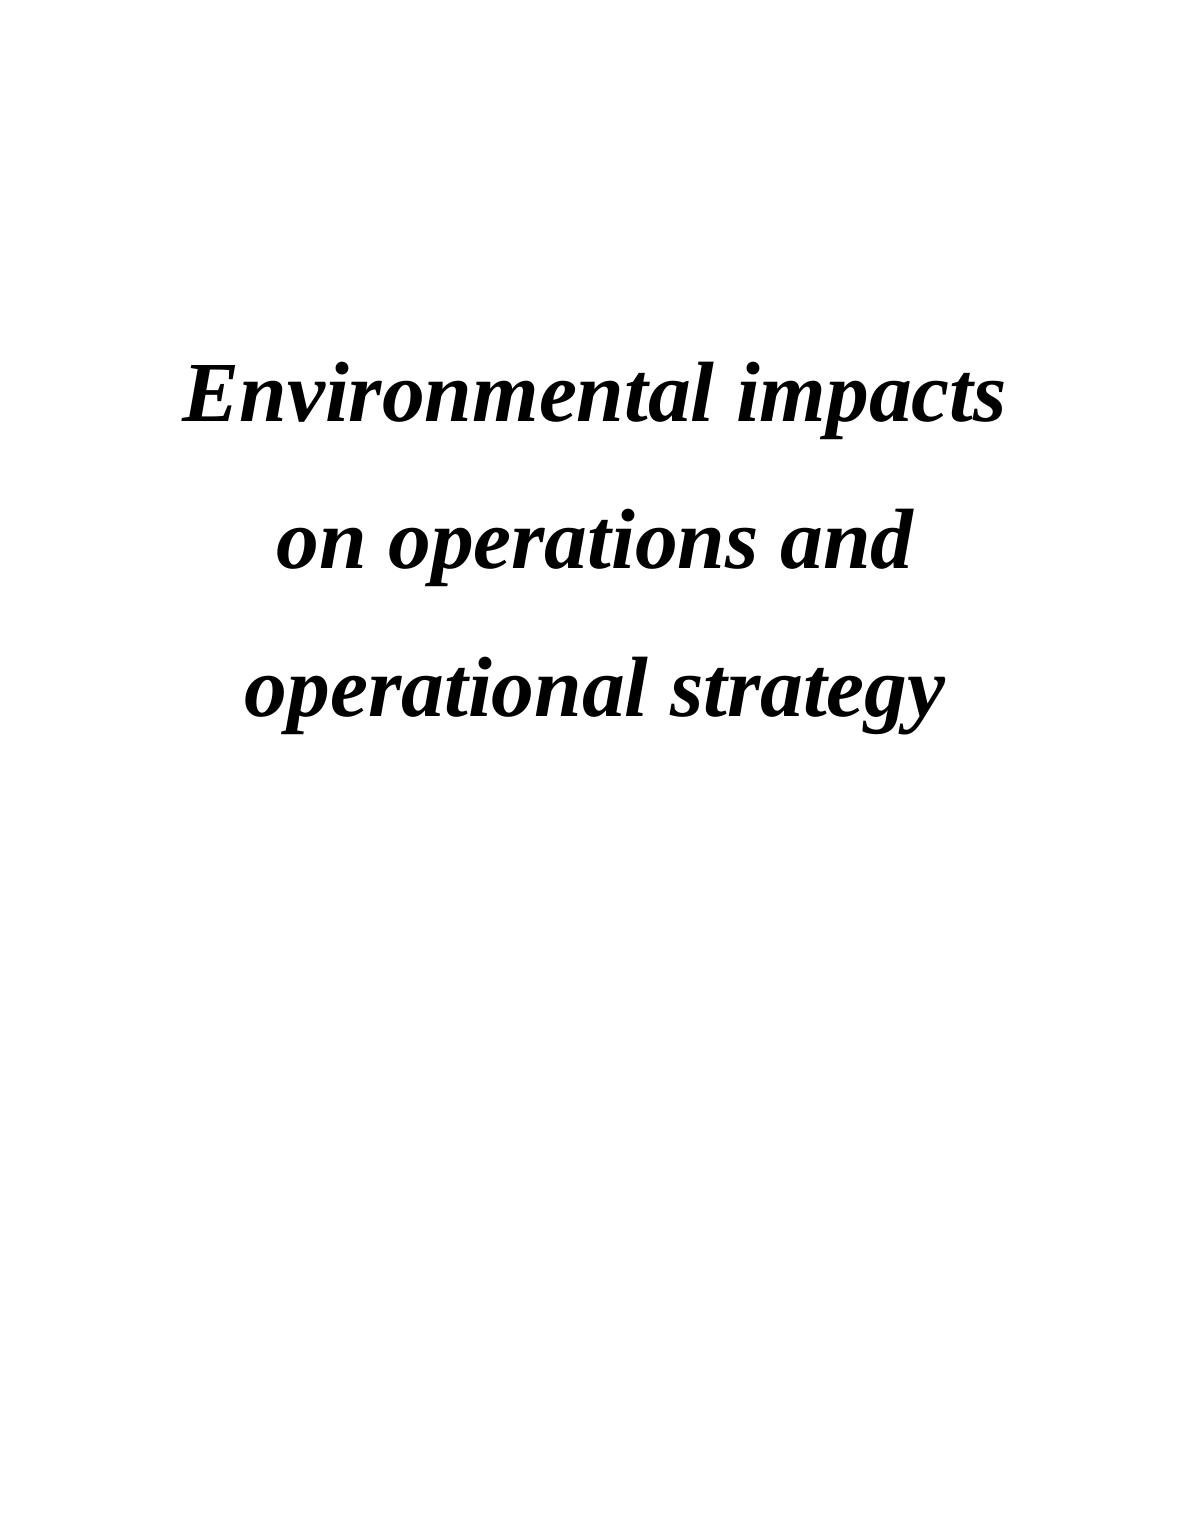 Environmental impacts on operations and operational strategy Assignment_1